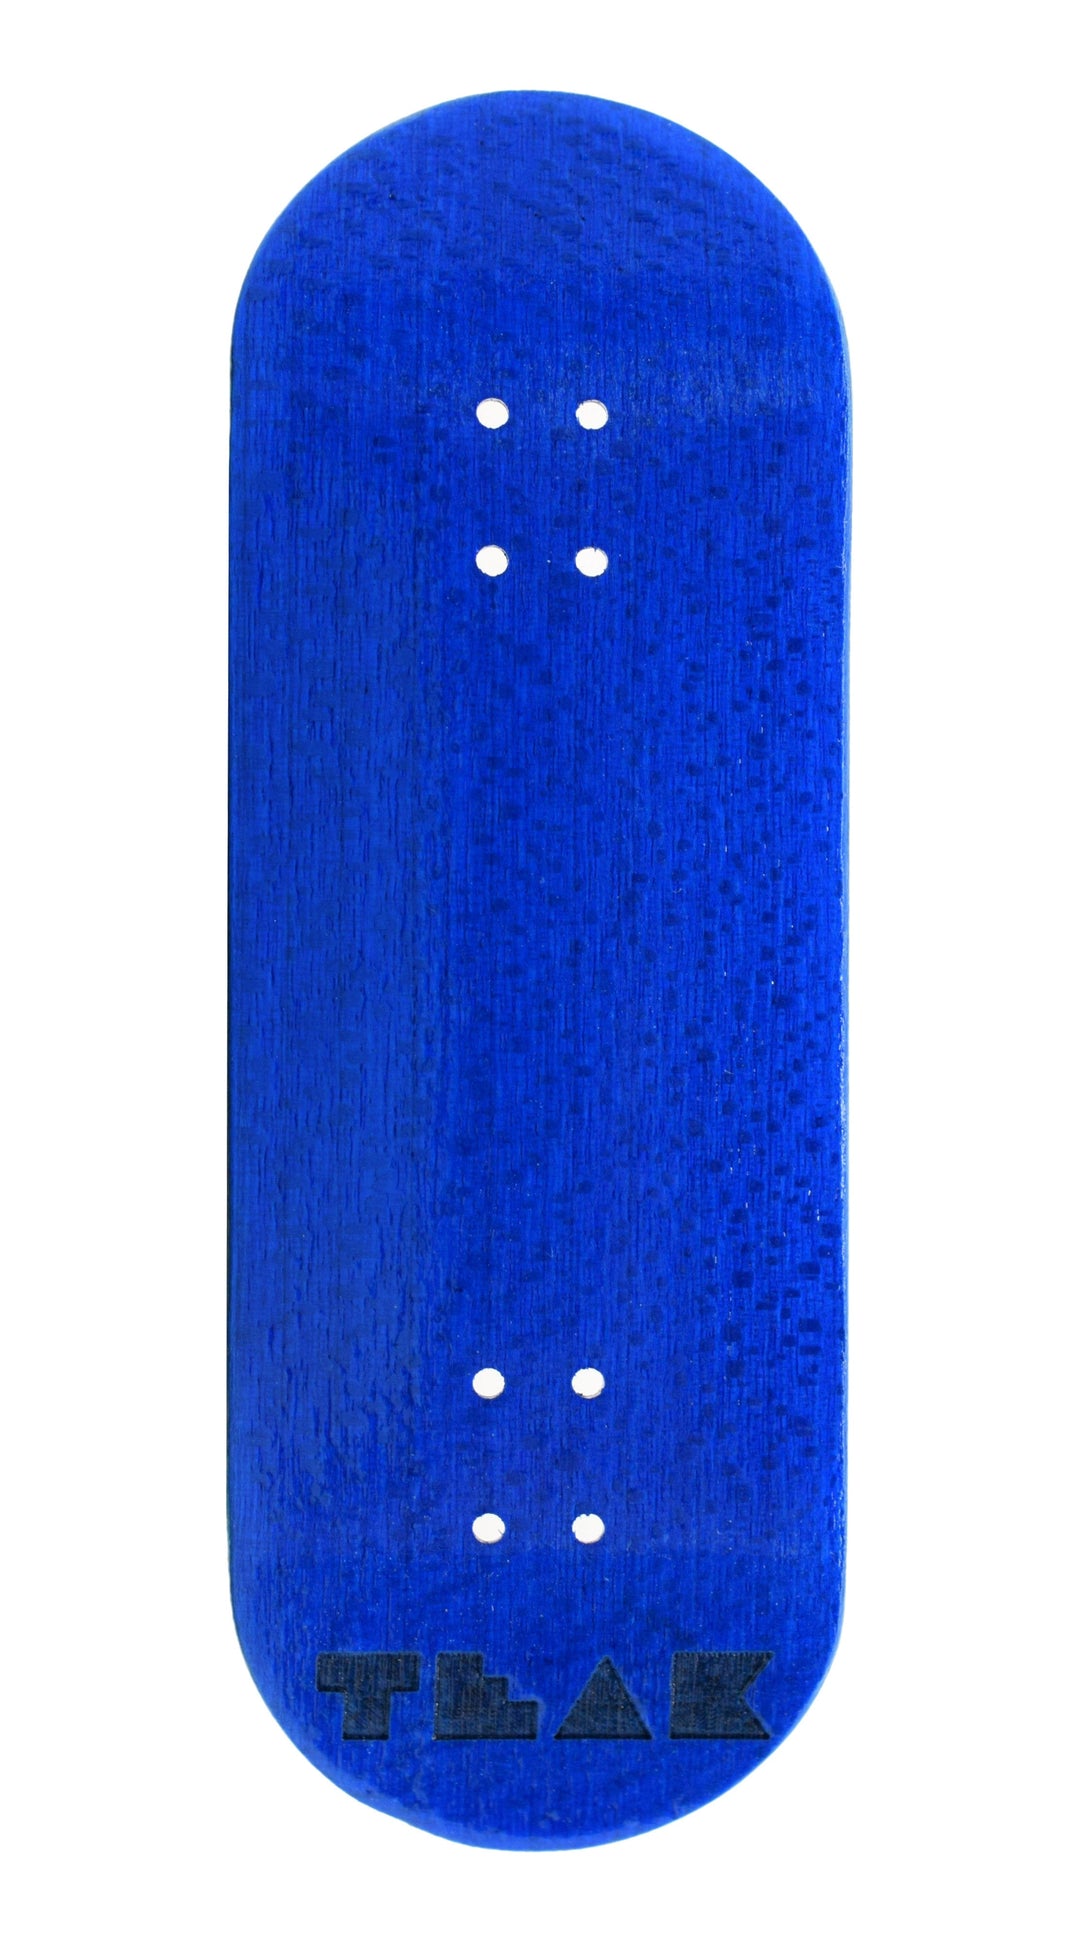 Teak Tuning PROlific Wooden 5 Ply Fingerboard Deck 34x95mm - Blizzard Blue - with Color Matching Mid Ply